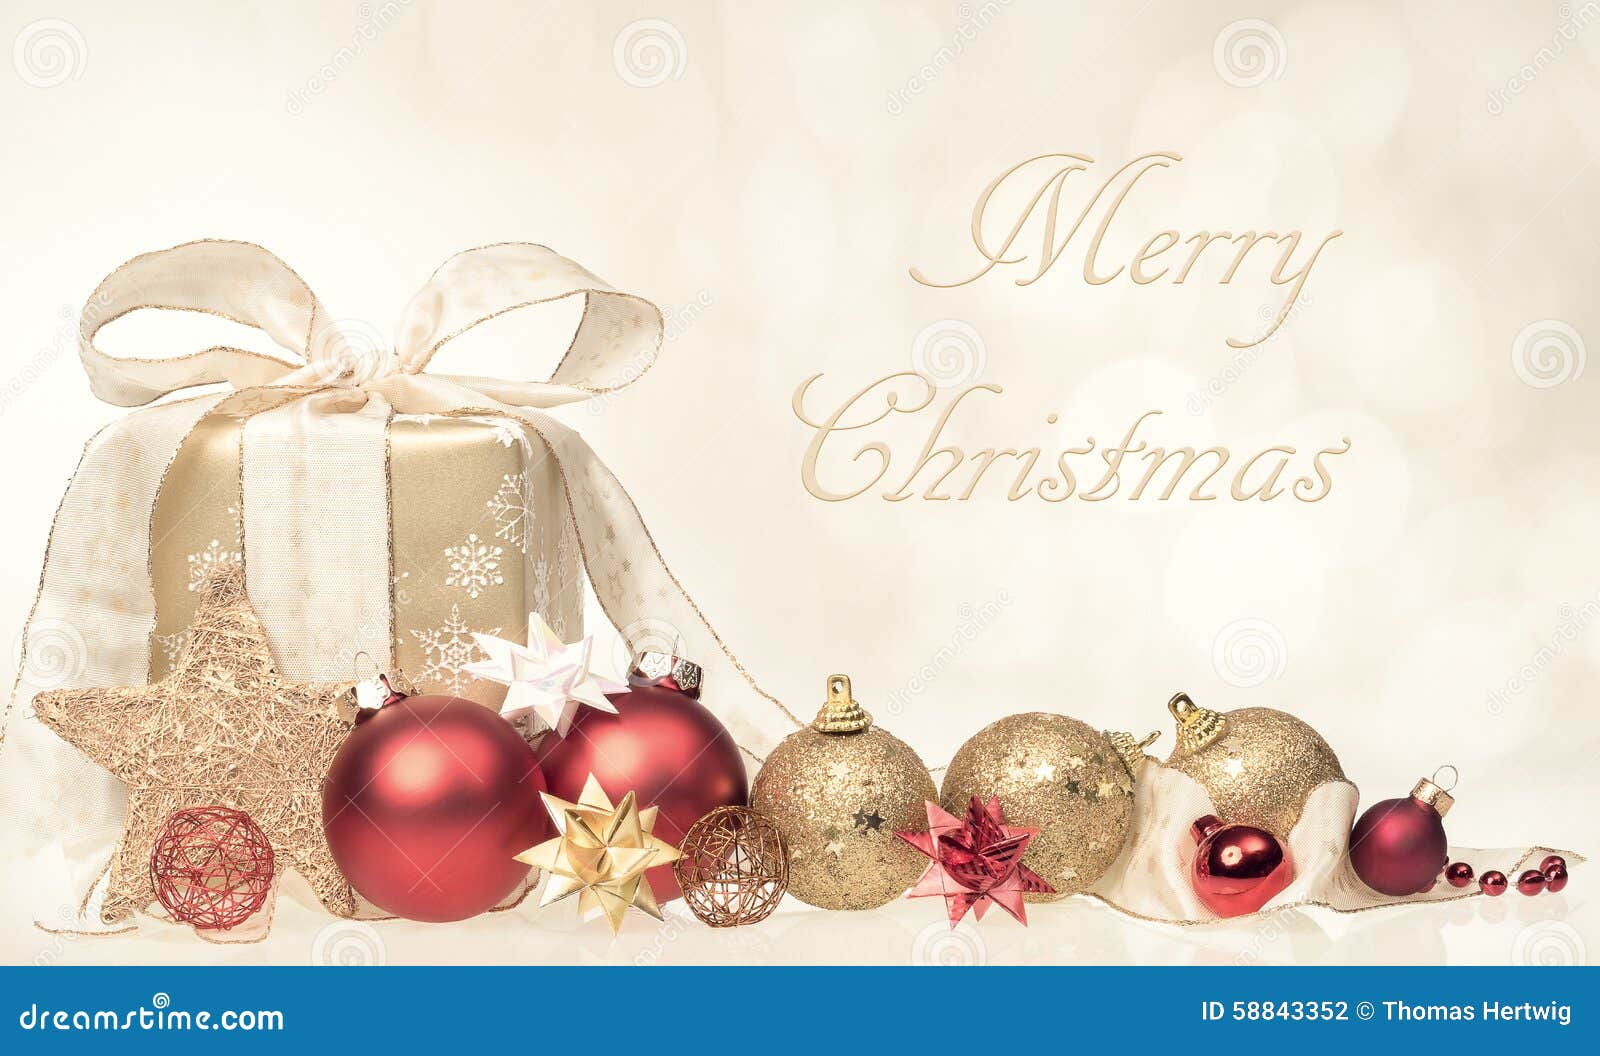 merry christmas card with gift and ornaments